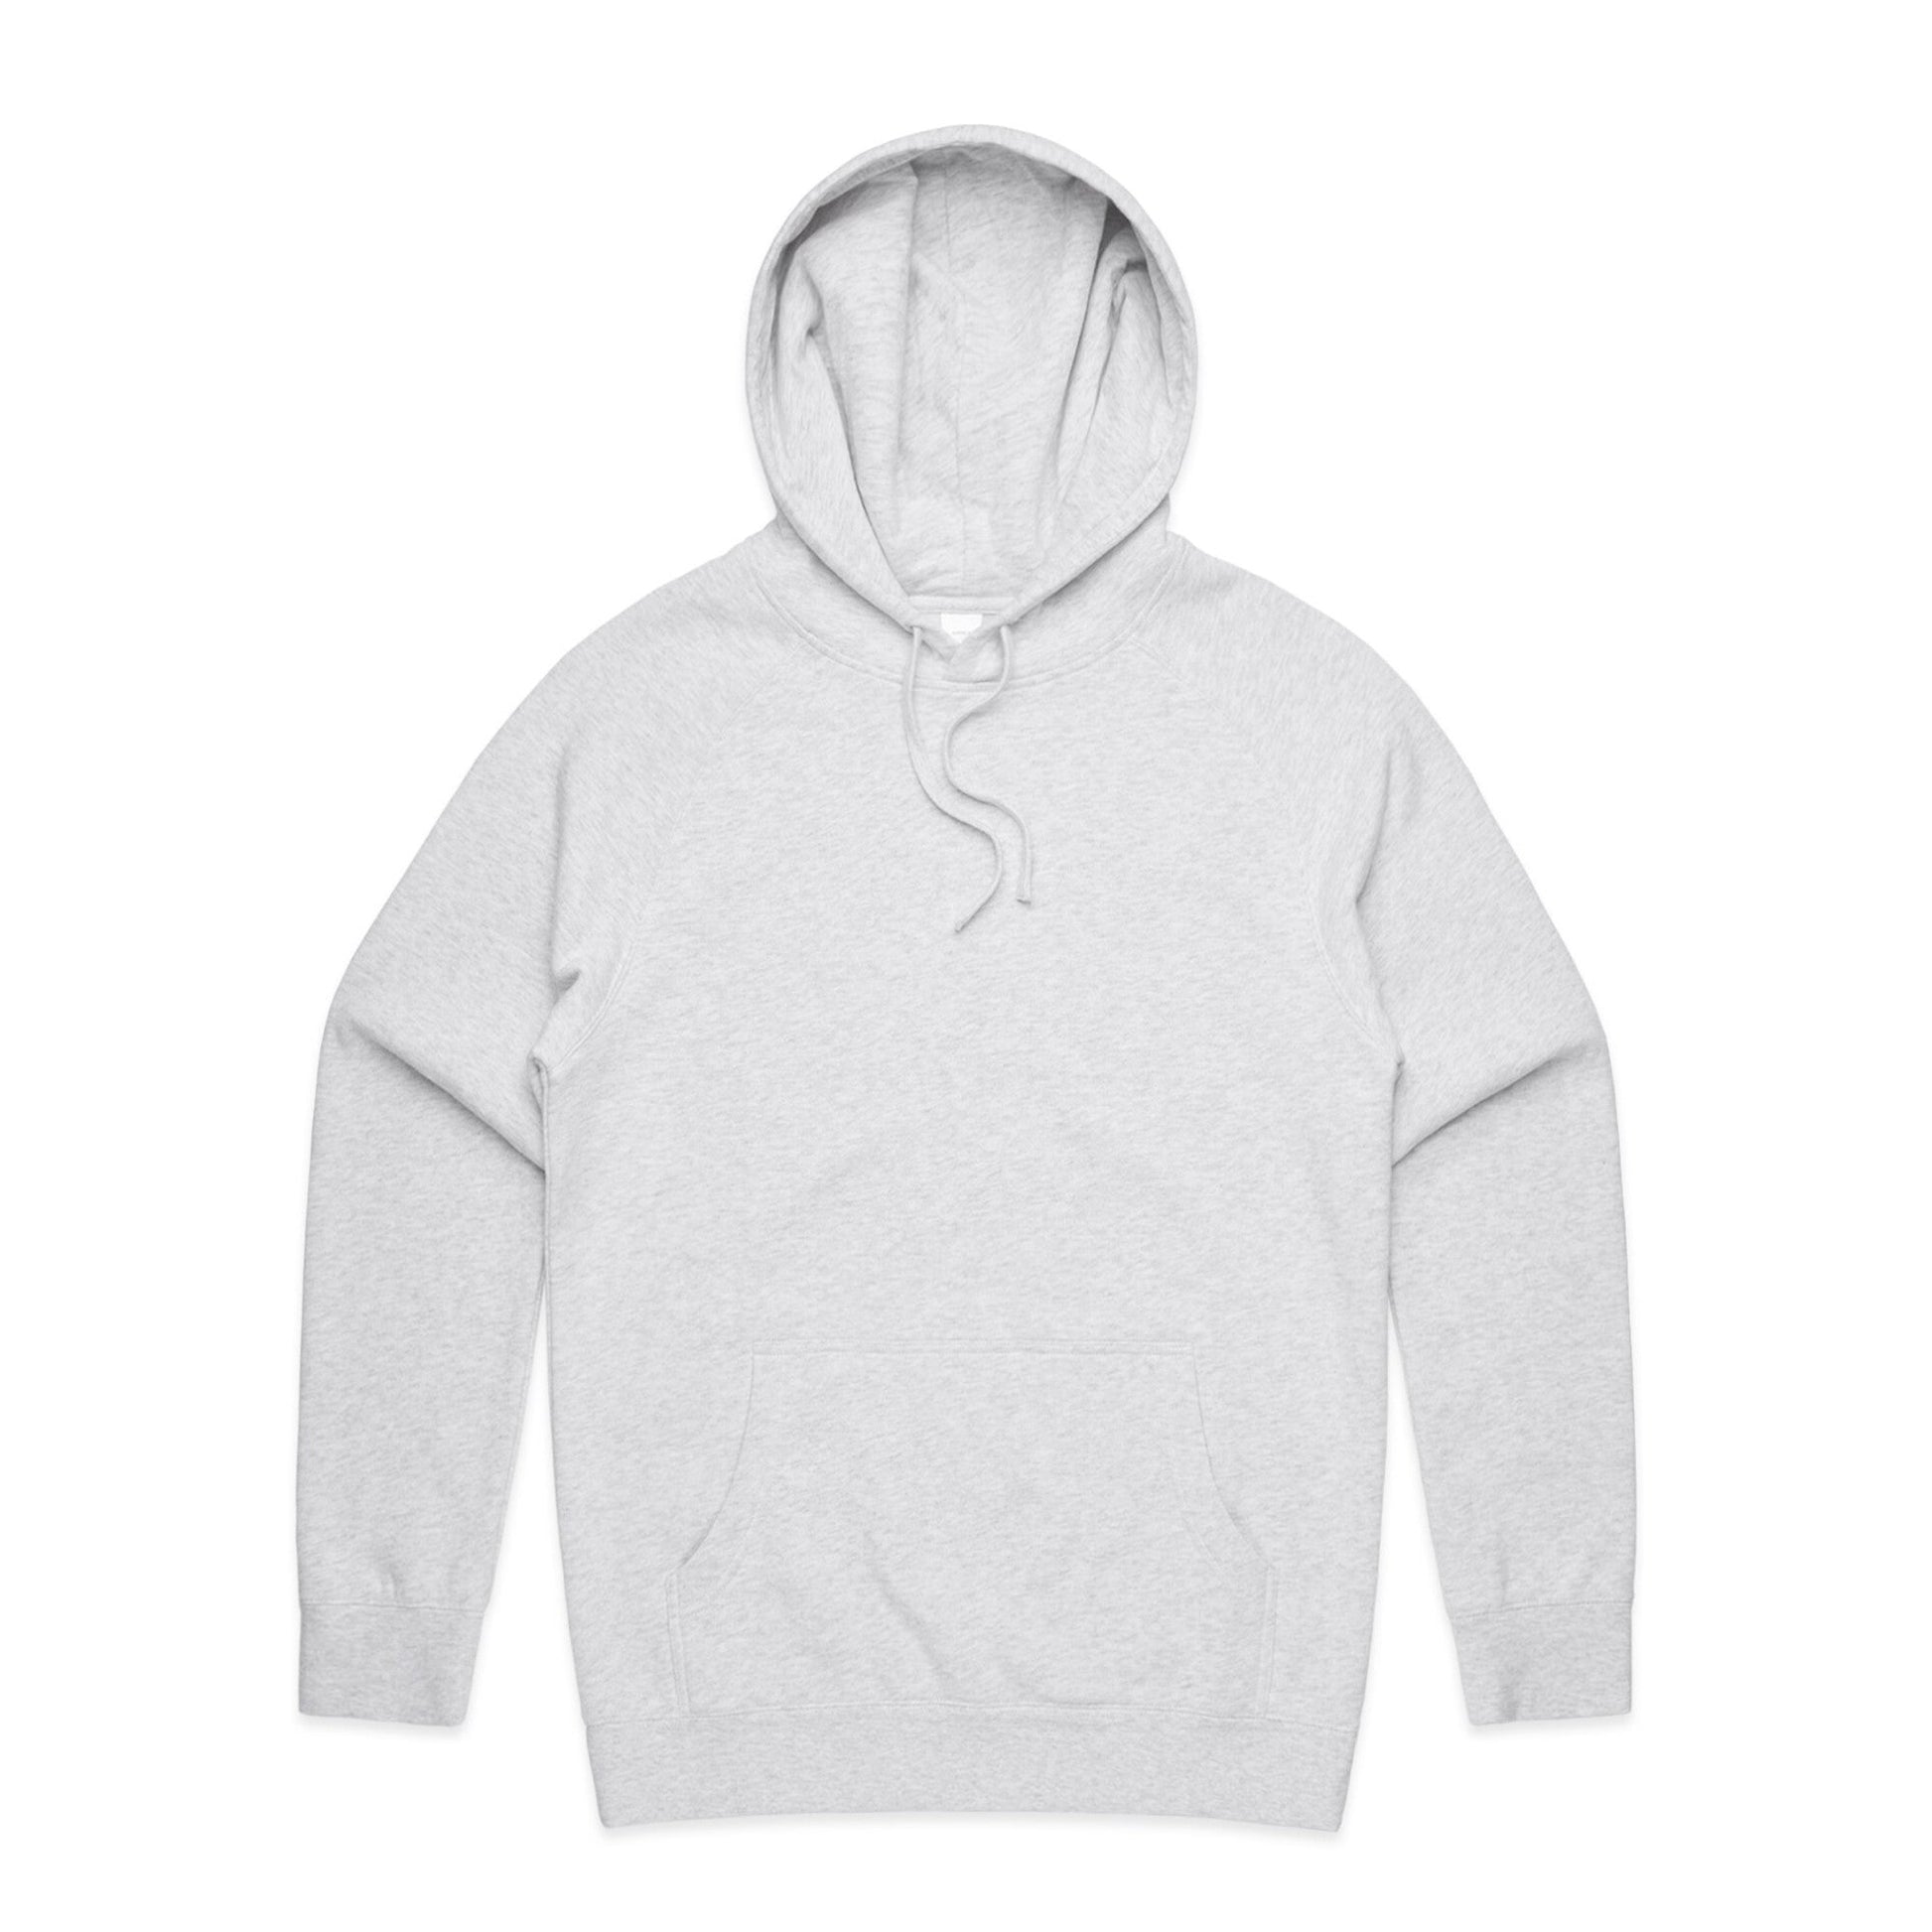 My Custom Design Physical product Pullover Hoodie